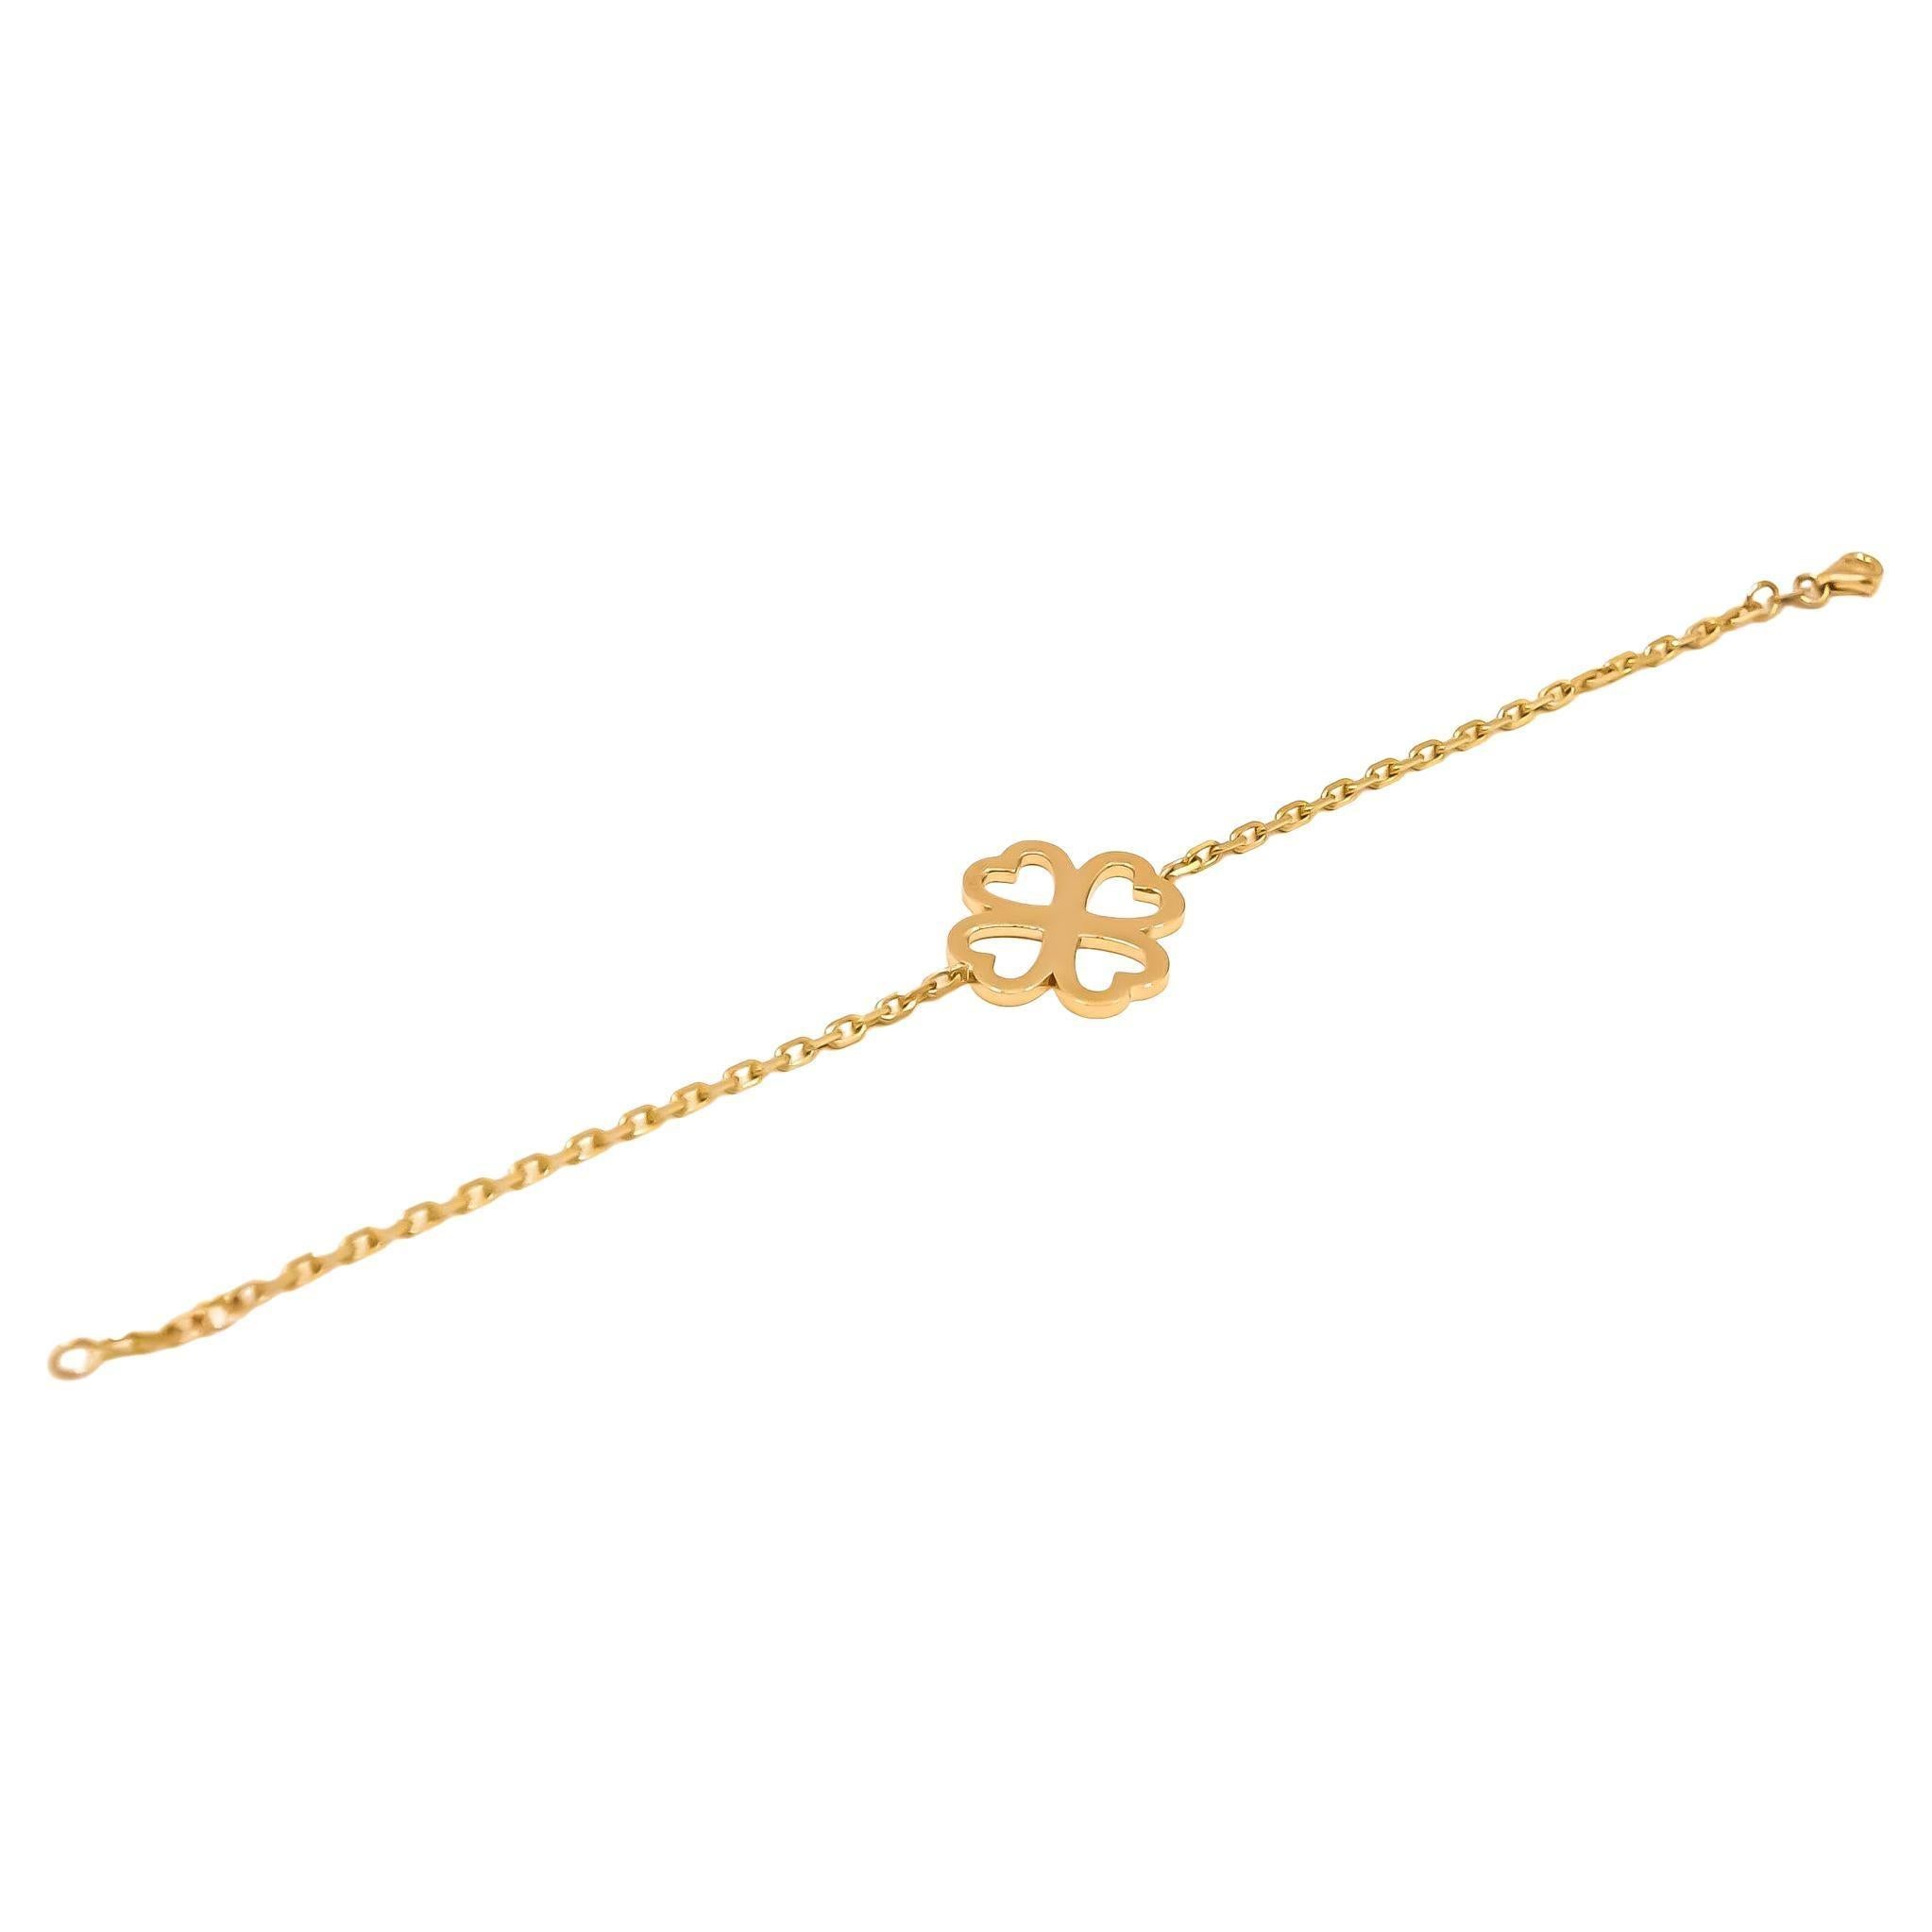 1 Motif Bracelet in 18kt Solid Yellow Gold by Mohamad Kamra from the Heart Blossom Collection.

Bracelet can be made in any wrist size.